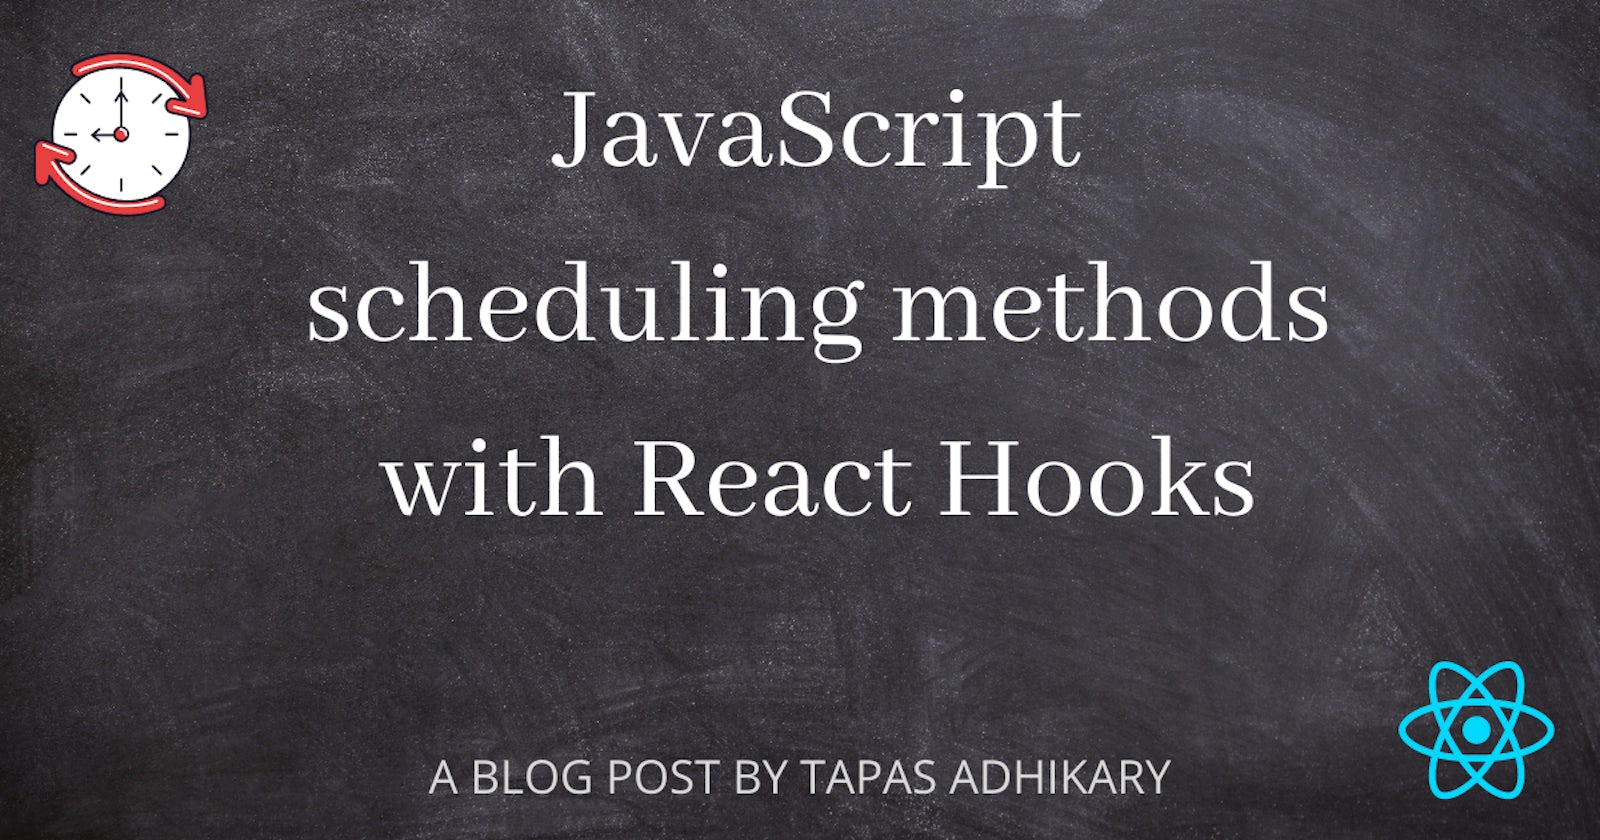 How to use JavaScript scheduling methods with React hooks